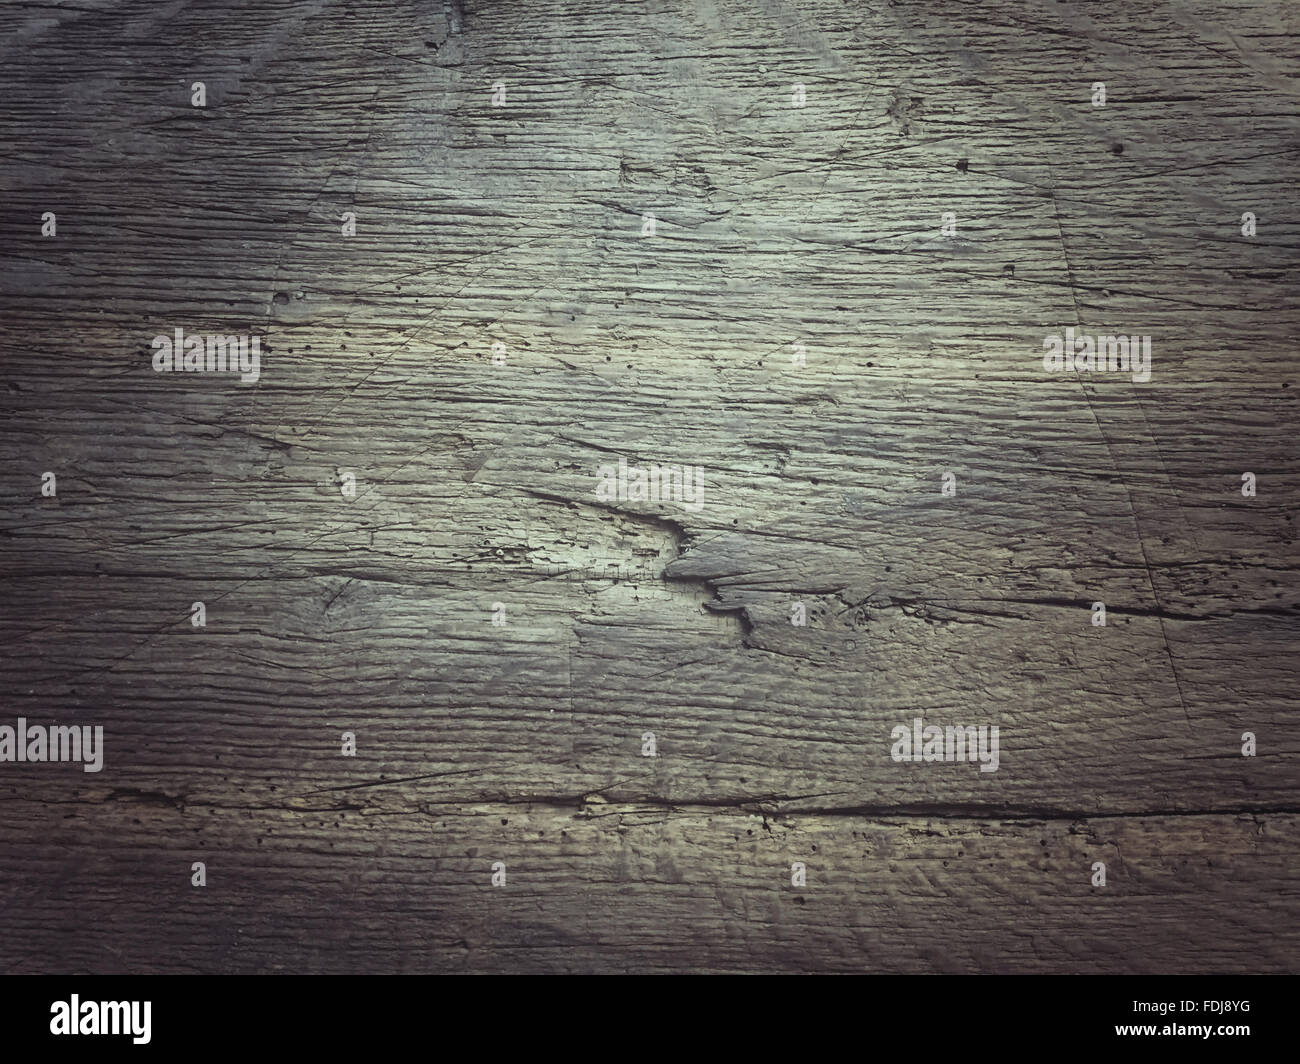 Abstract old wooden background texture Stock Photo